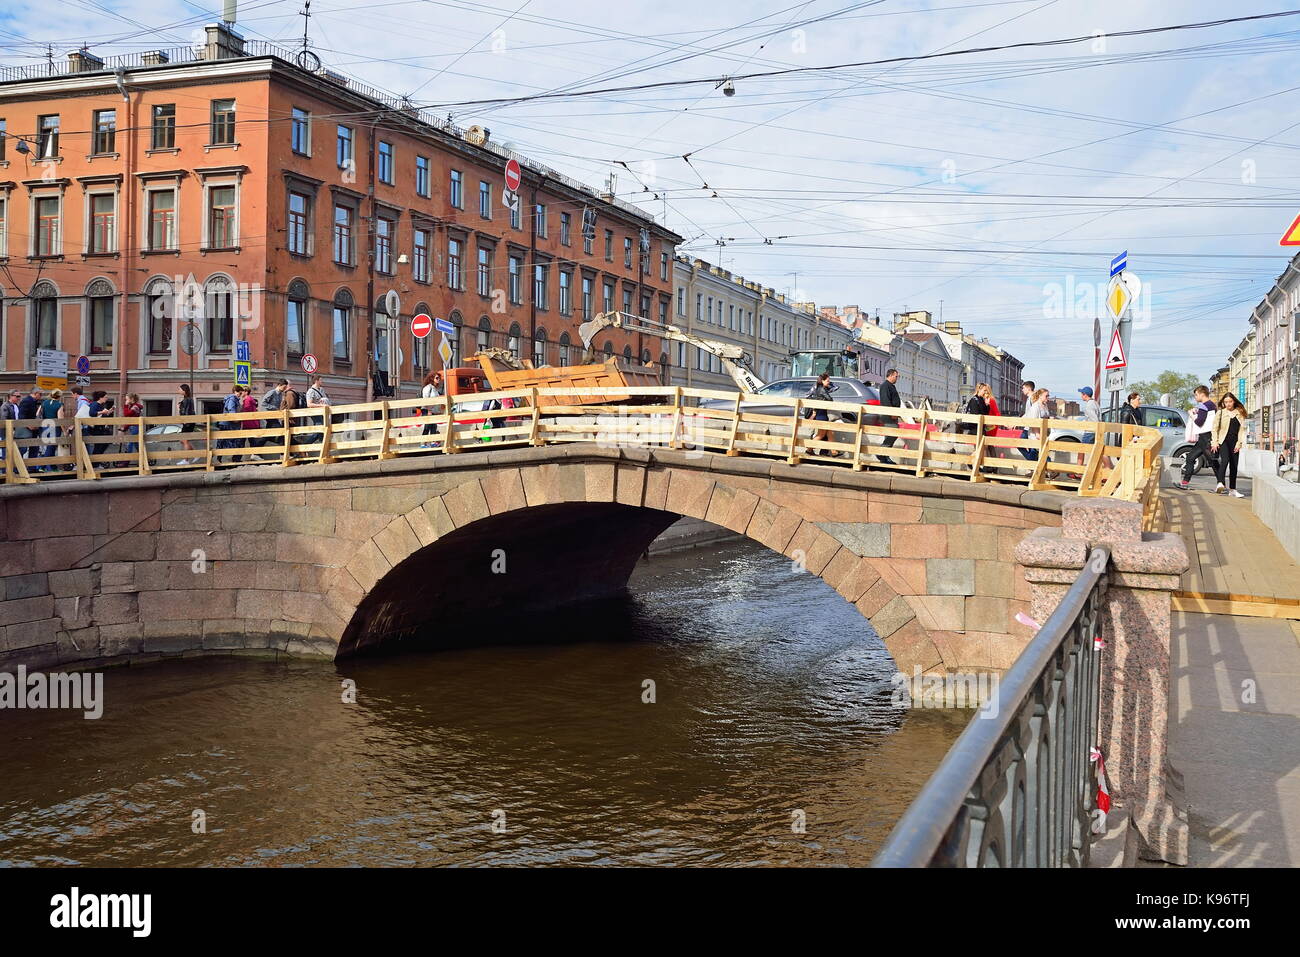 Construction equipment for Stone bridge over Griboyedov Canal in Stock Photo